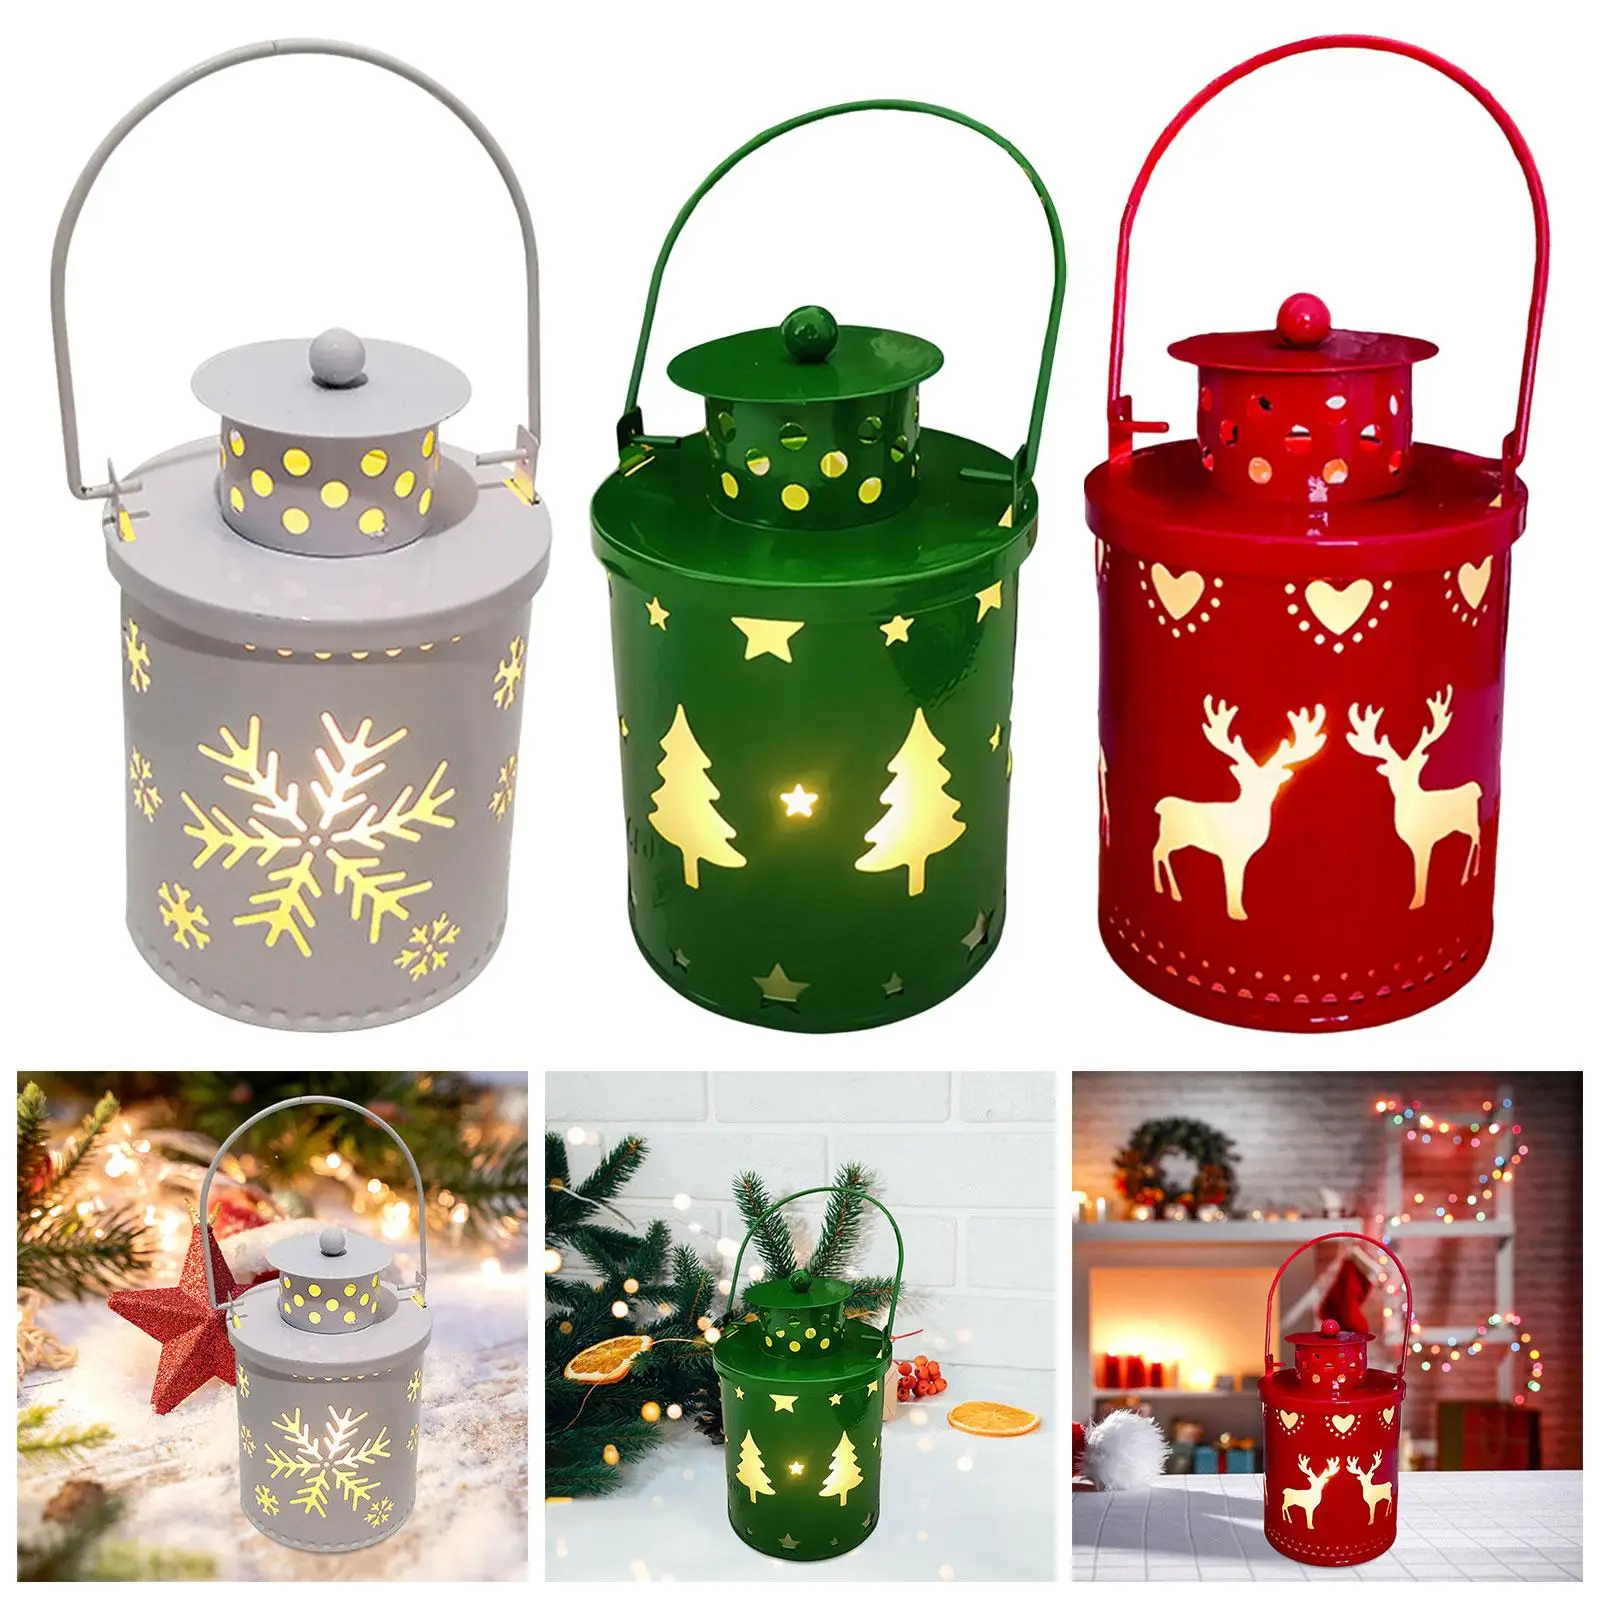 Christmas Lighted Lantern Candlesticks Desktop Lamp Props Ornaments Candle Lantern for Holidays Birthday Xmas Party Fireplace